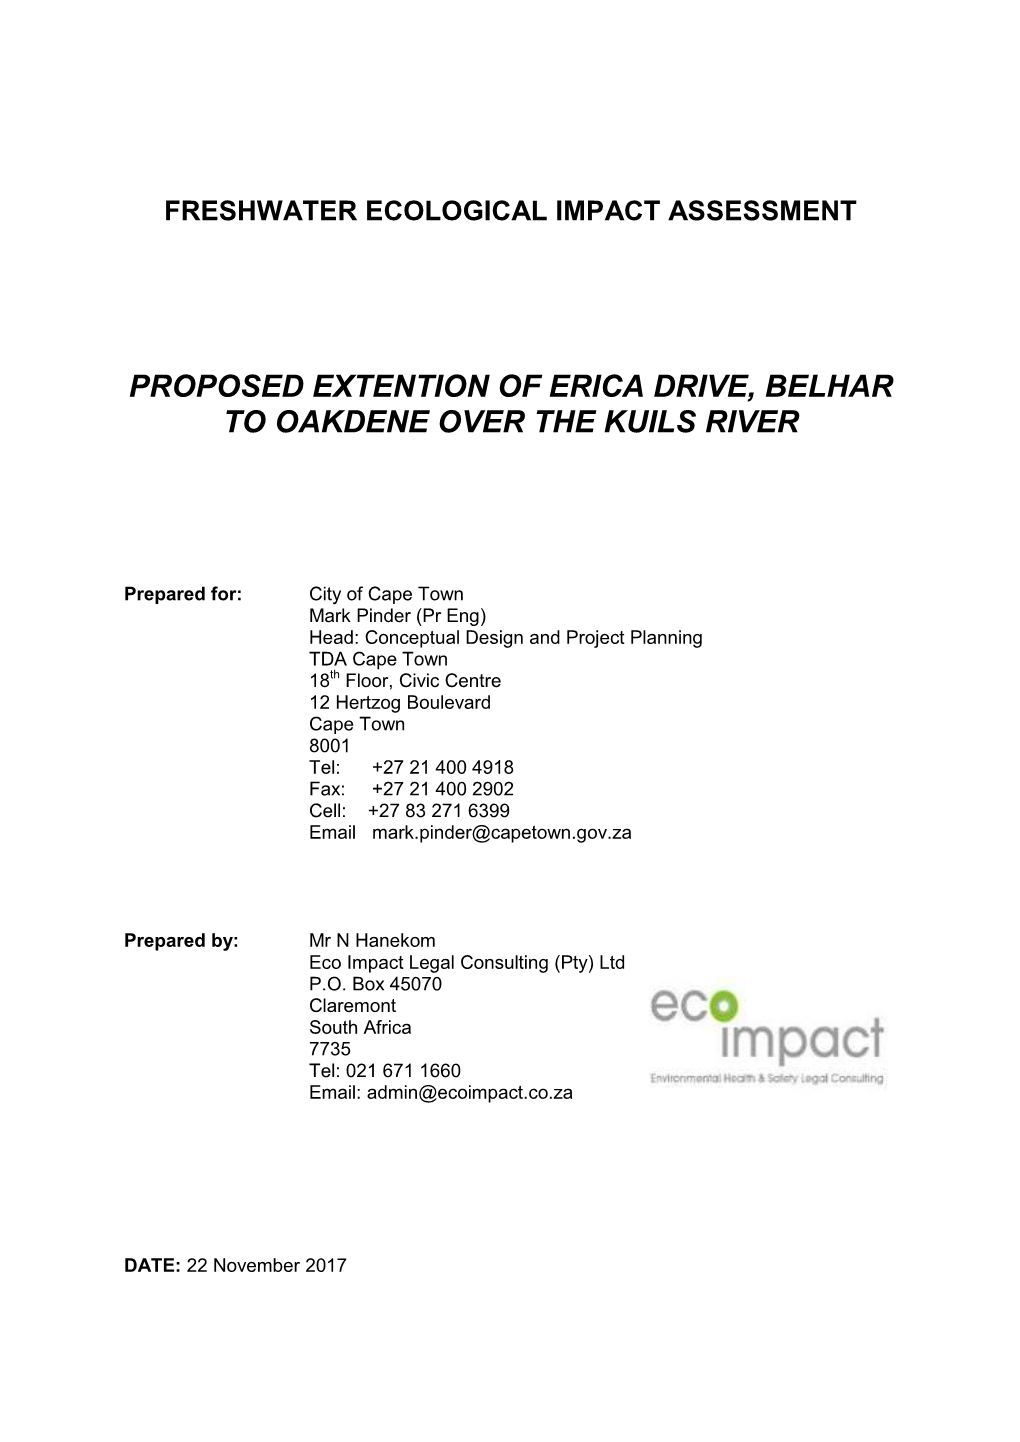 Proposed Extention of Erica Drive, Belhar to Oakdene Over the Kuils River